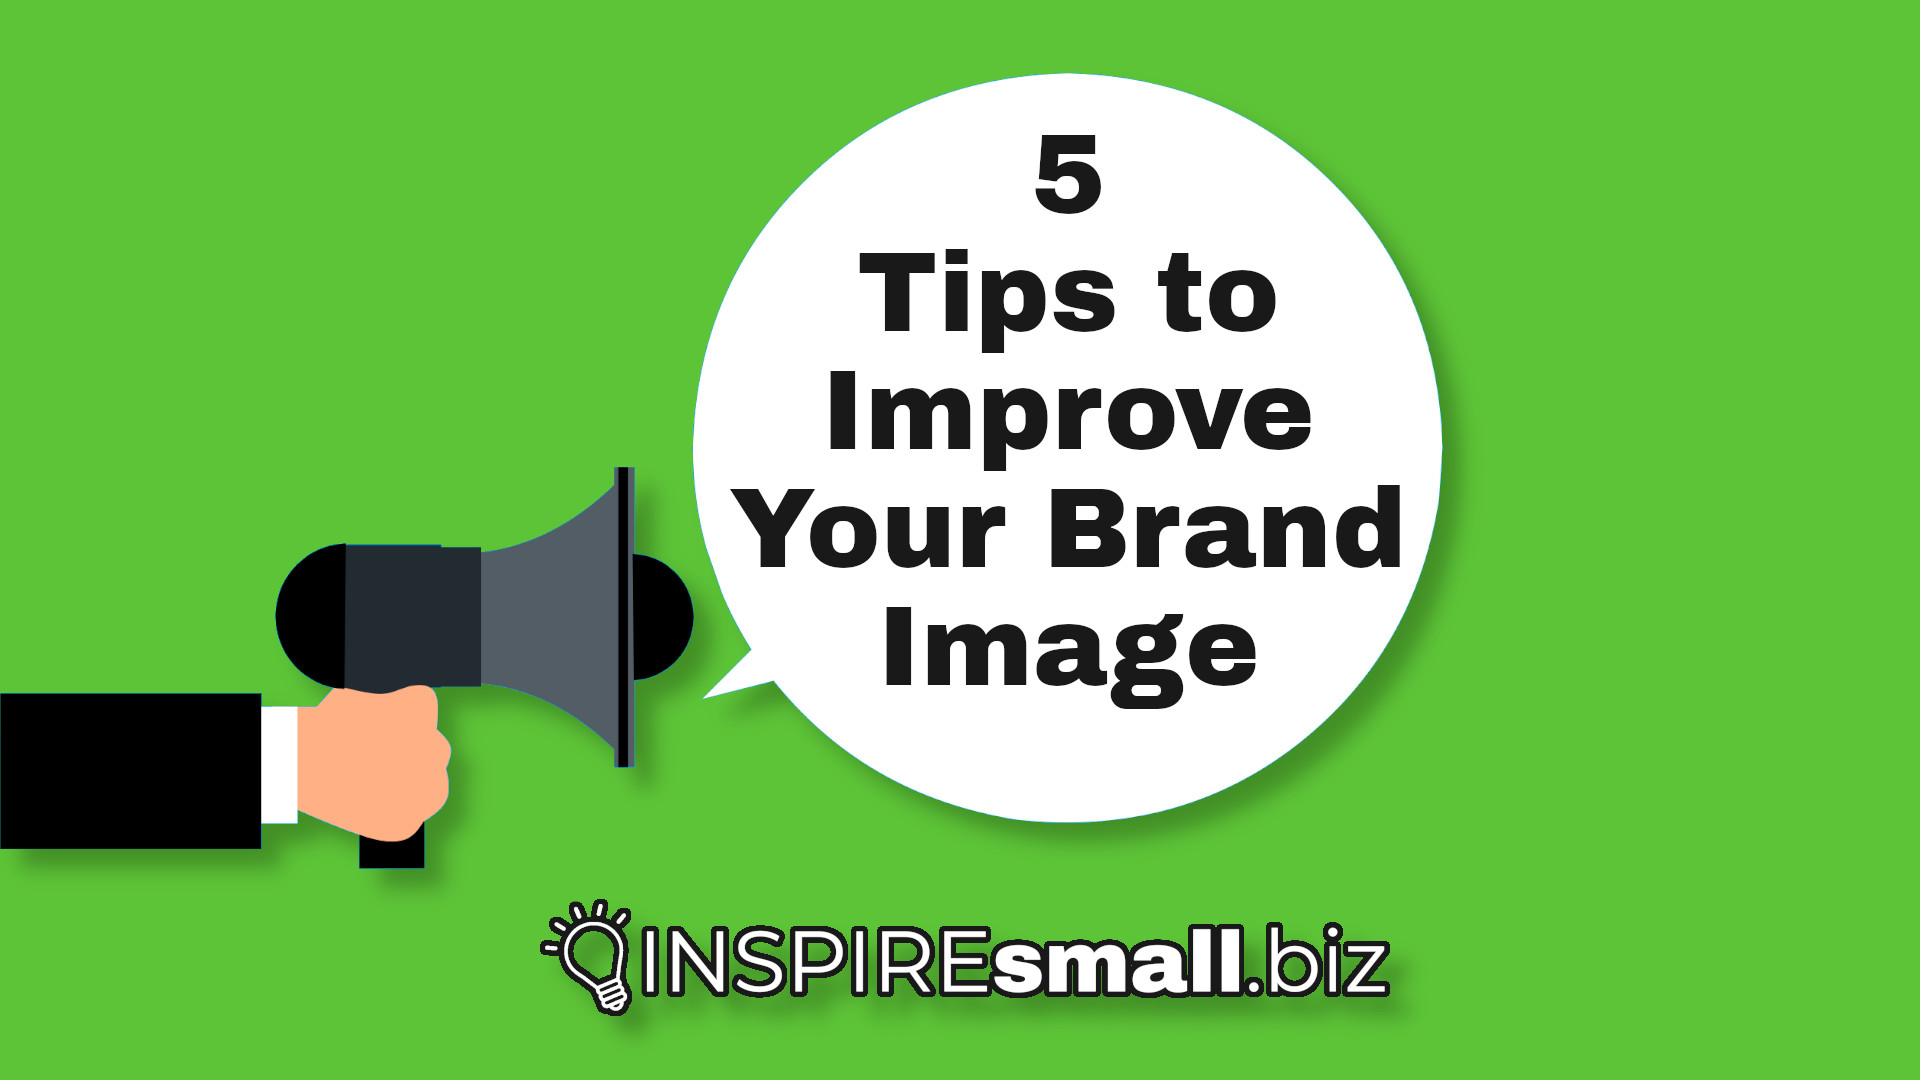 Person holding a megaphone that says "5 Tips for Improving Your Brand Image"